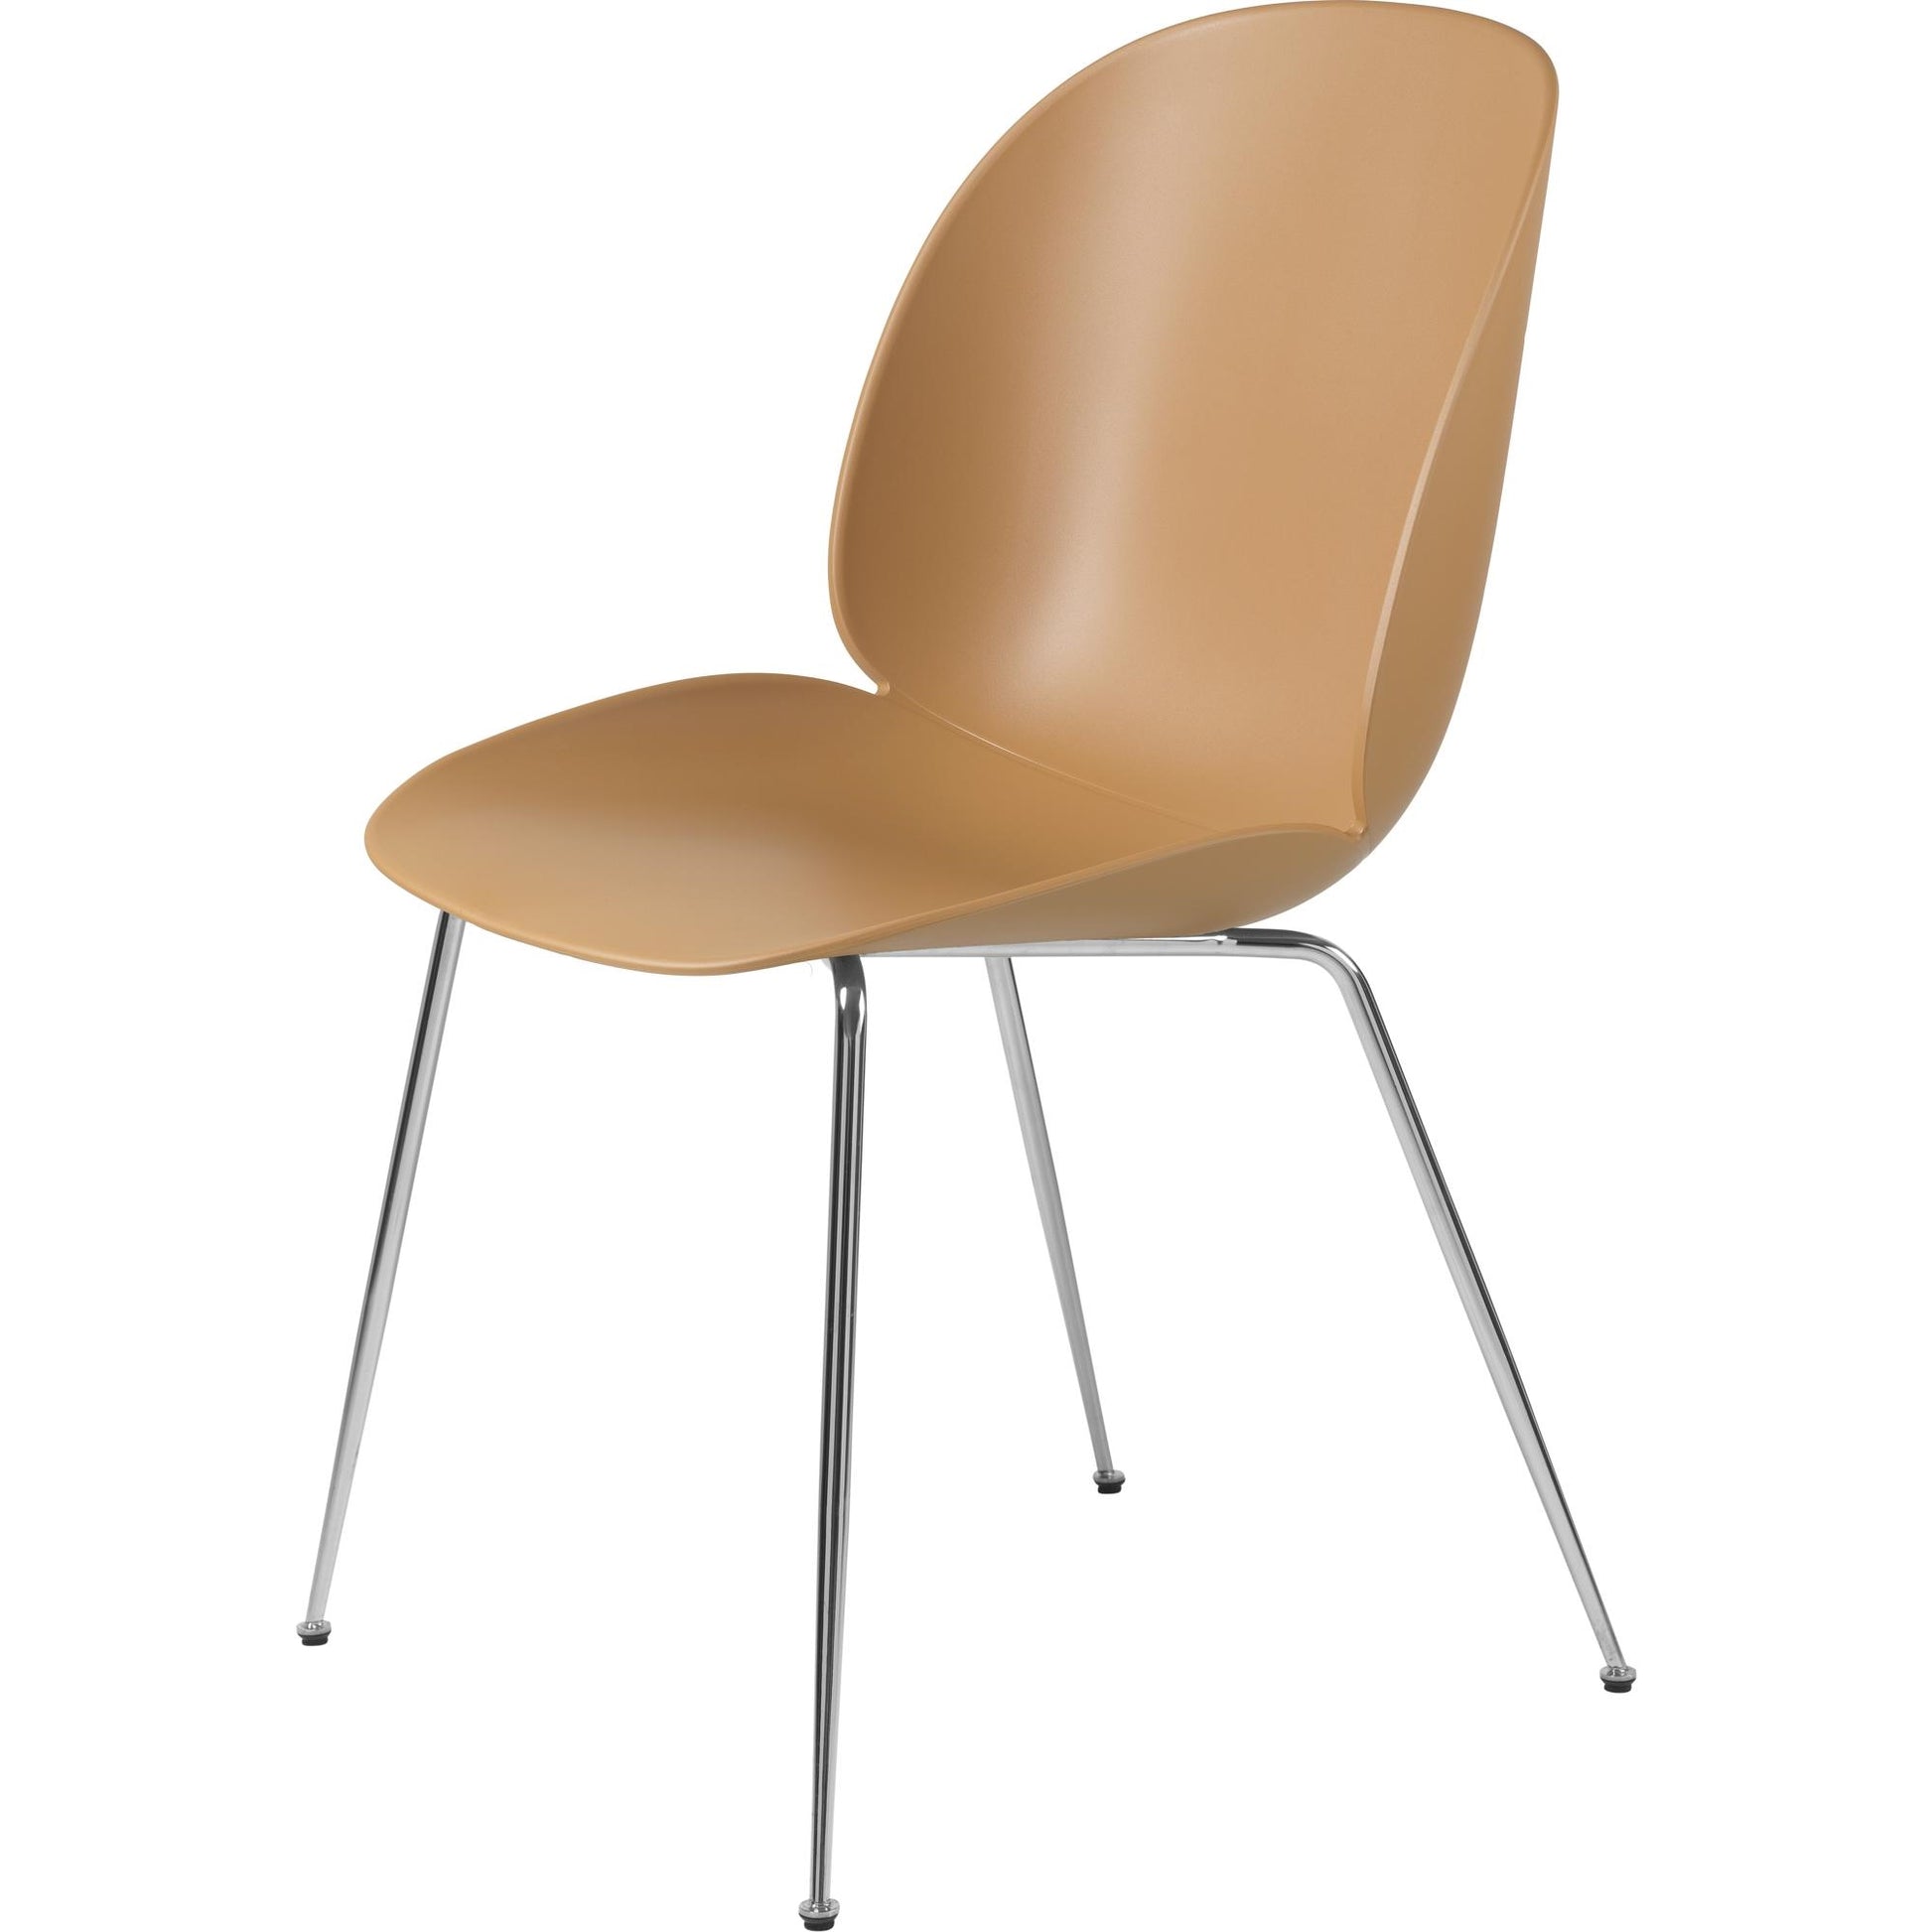 Beetle Dining Chair Conic Base Chrome by GUBI #Chrome/ Amber Brown